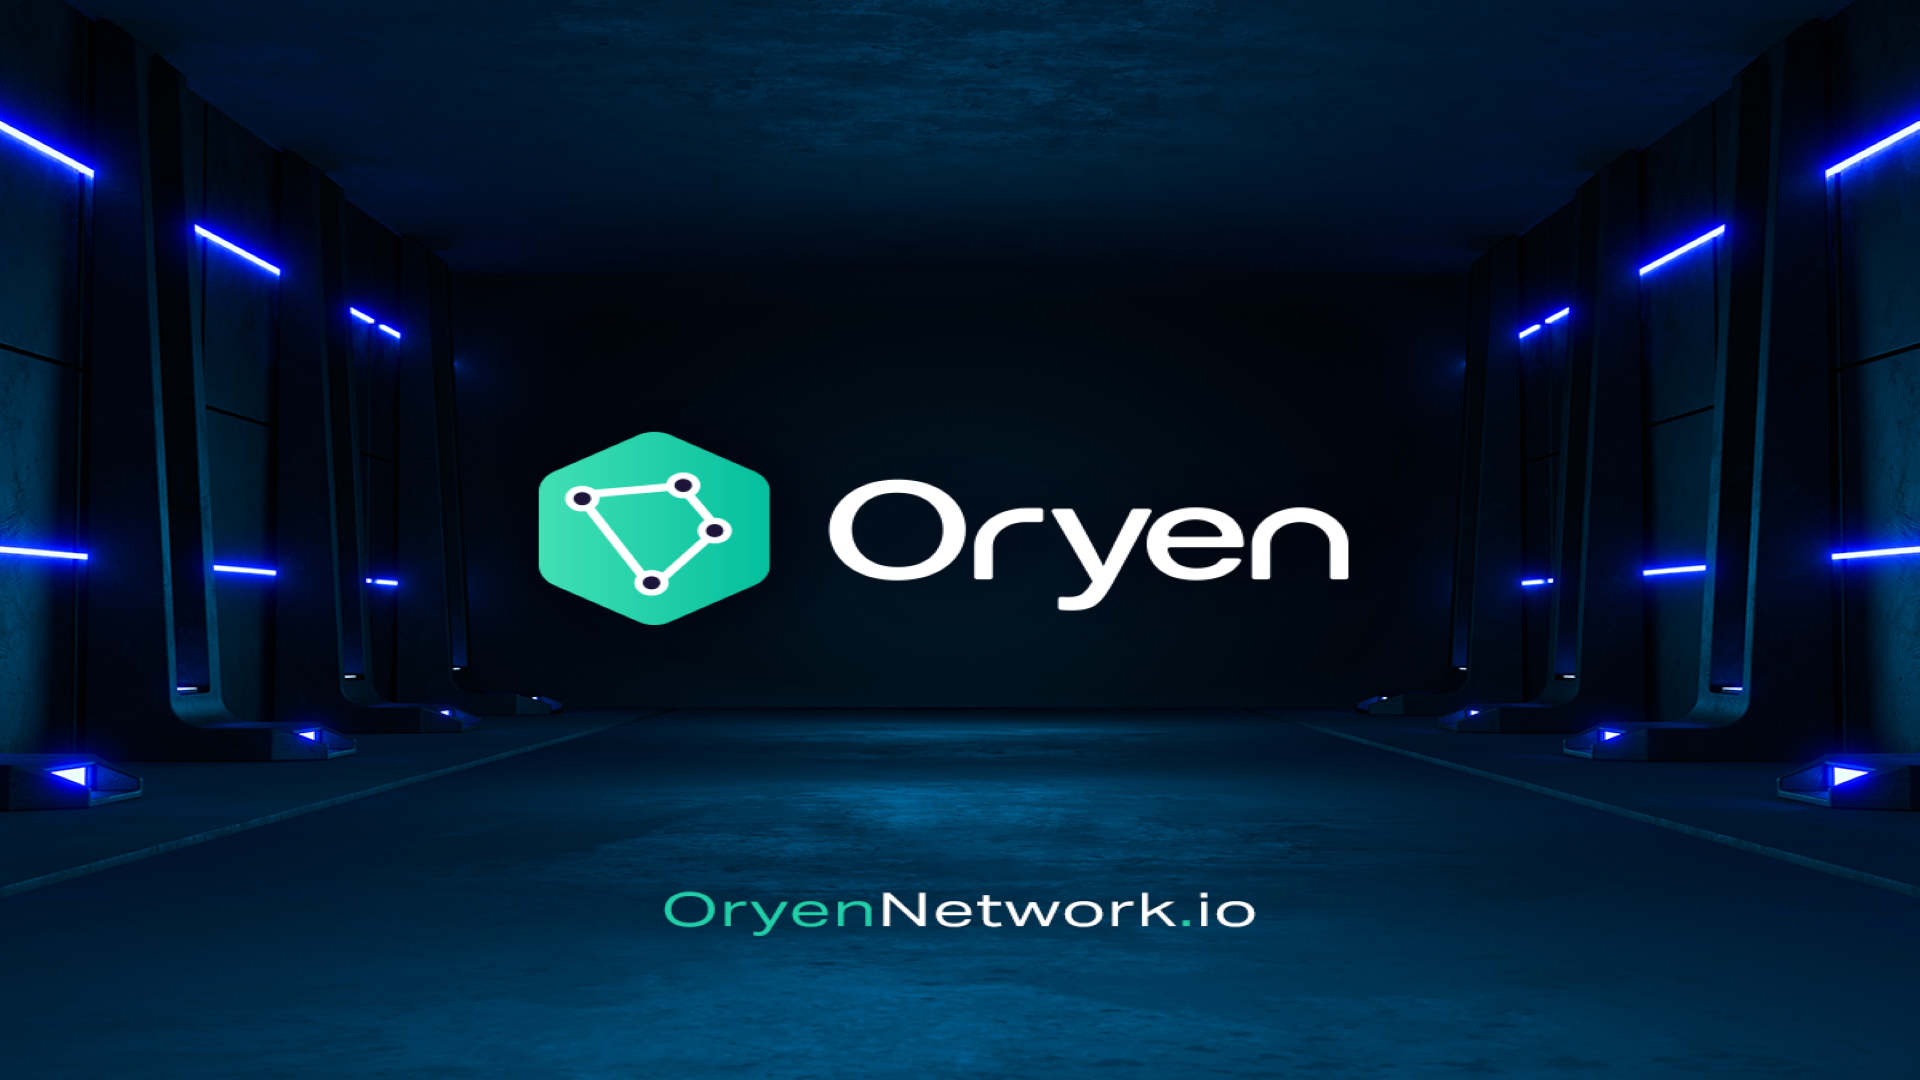 Oryen Network offers the best Passive Income unlike Pancakeswap and Spookyswap